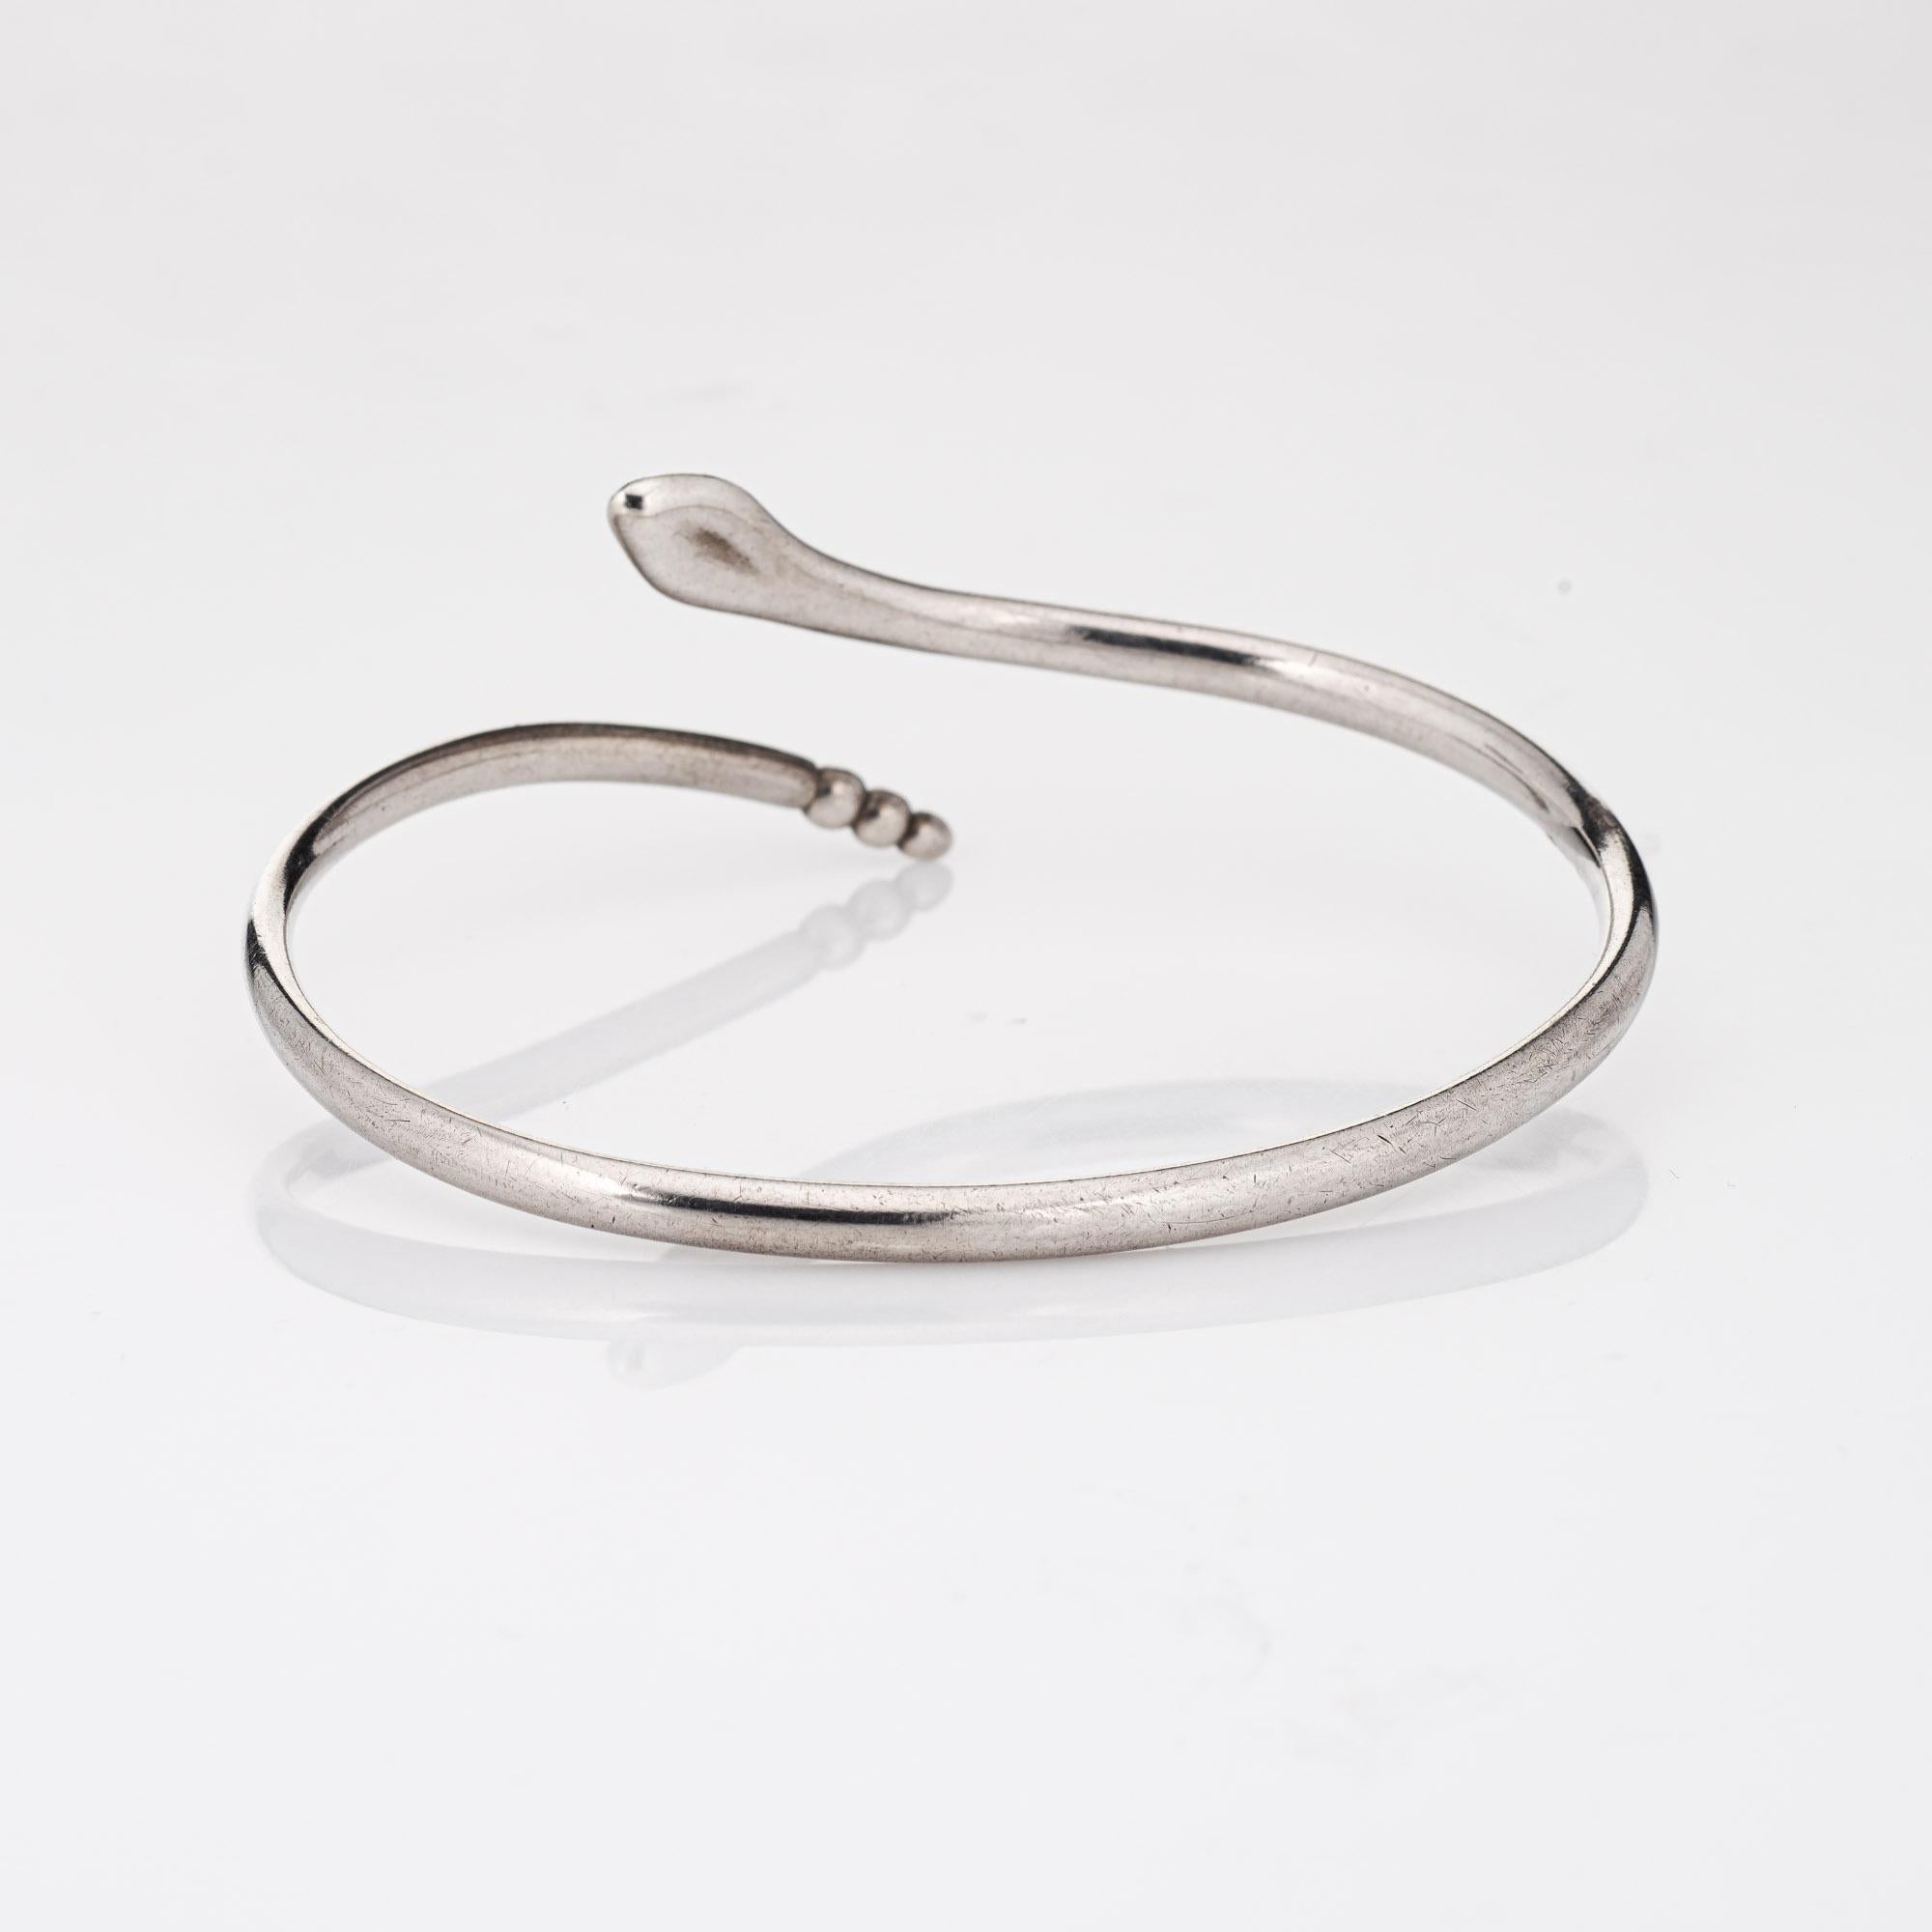 Stylish and finely detailed estate Tiffany & Co snake bracelet crafted in sterling silver.  

The classic snake bracelet was designed by the famed Elsa Peretti. Measuring 7 1/2 inches the bracelet easily slips on and off the wrist. 

The bracelet is